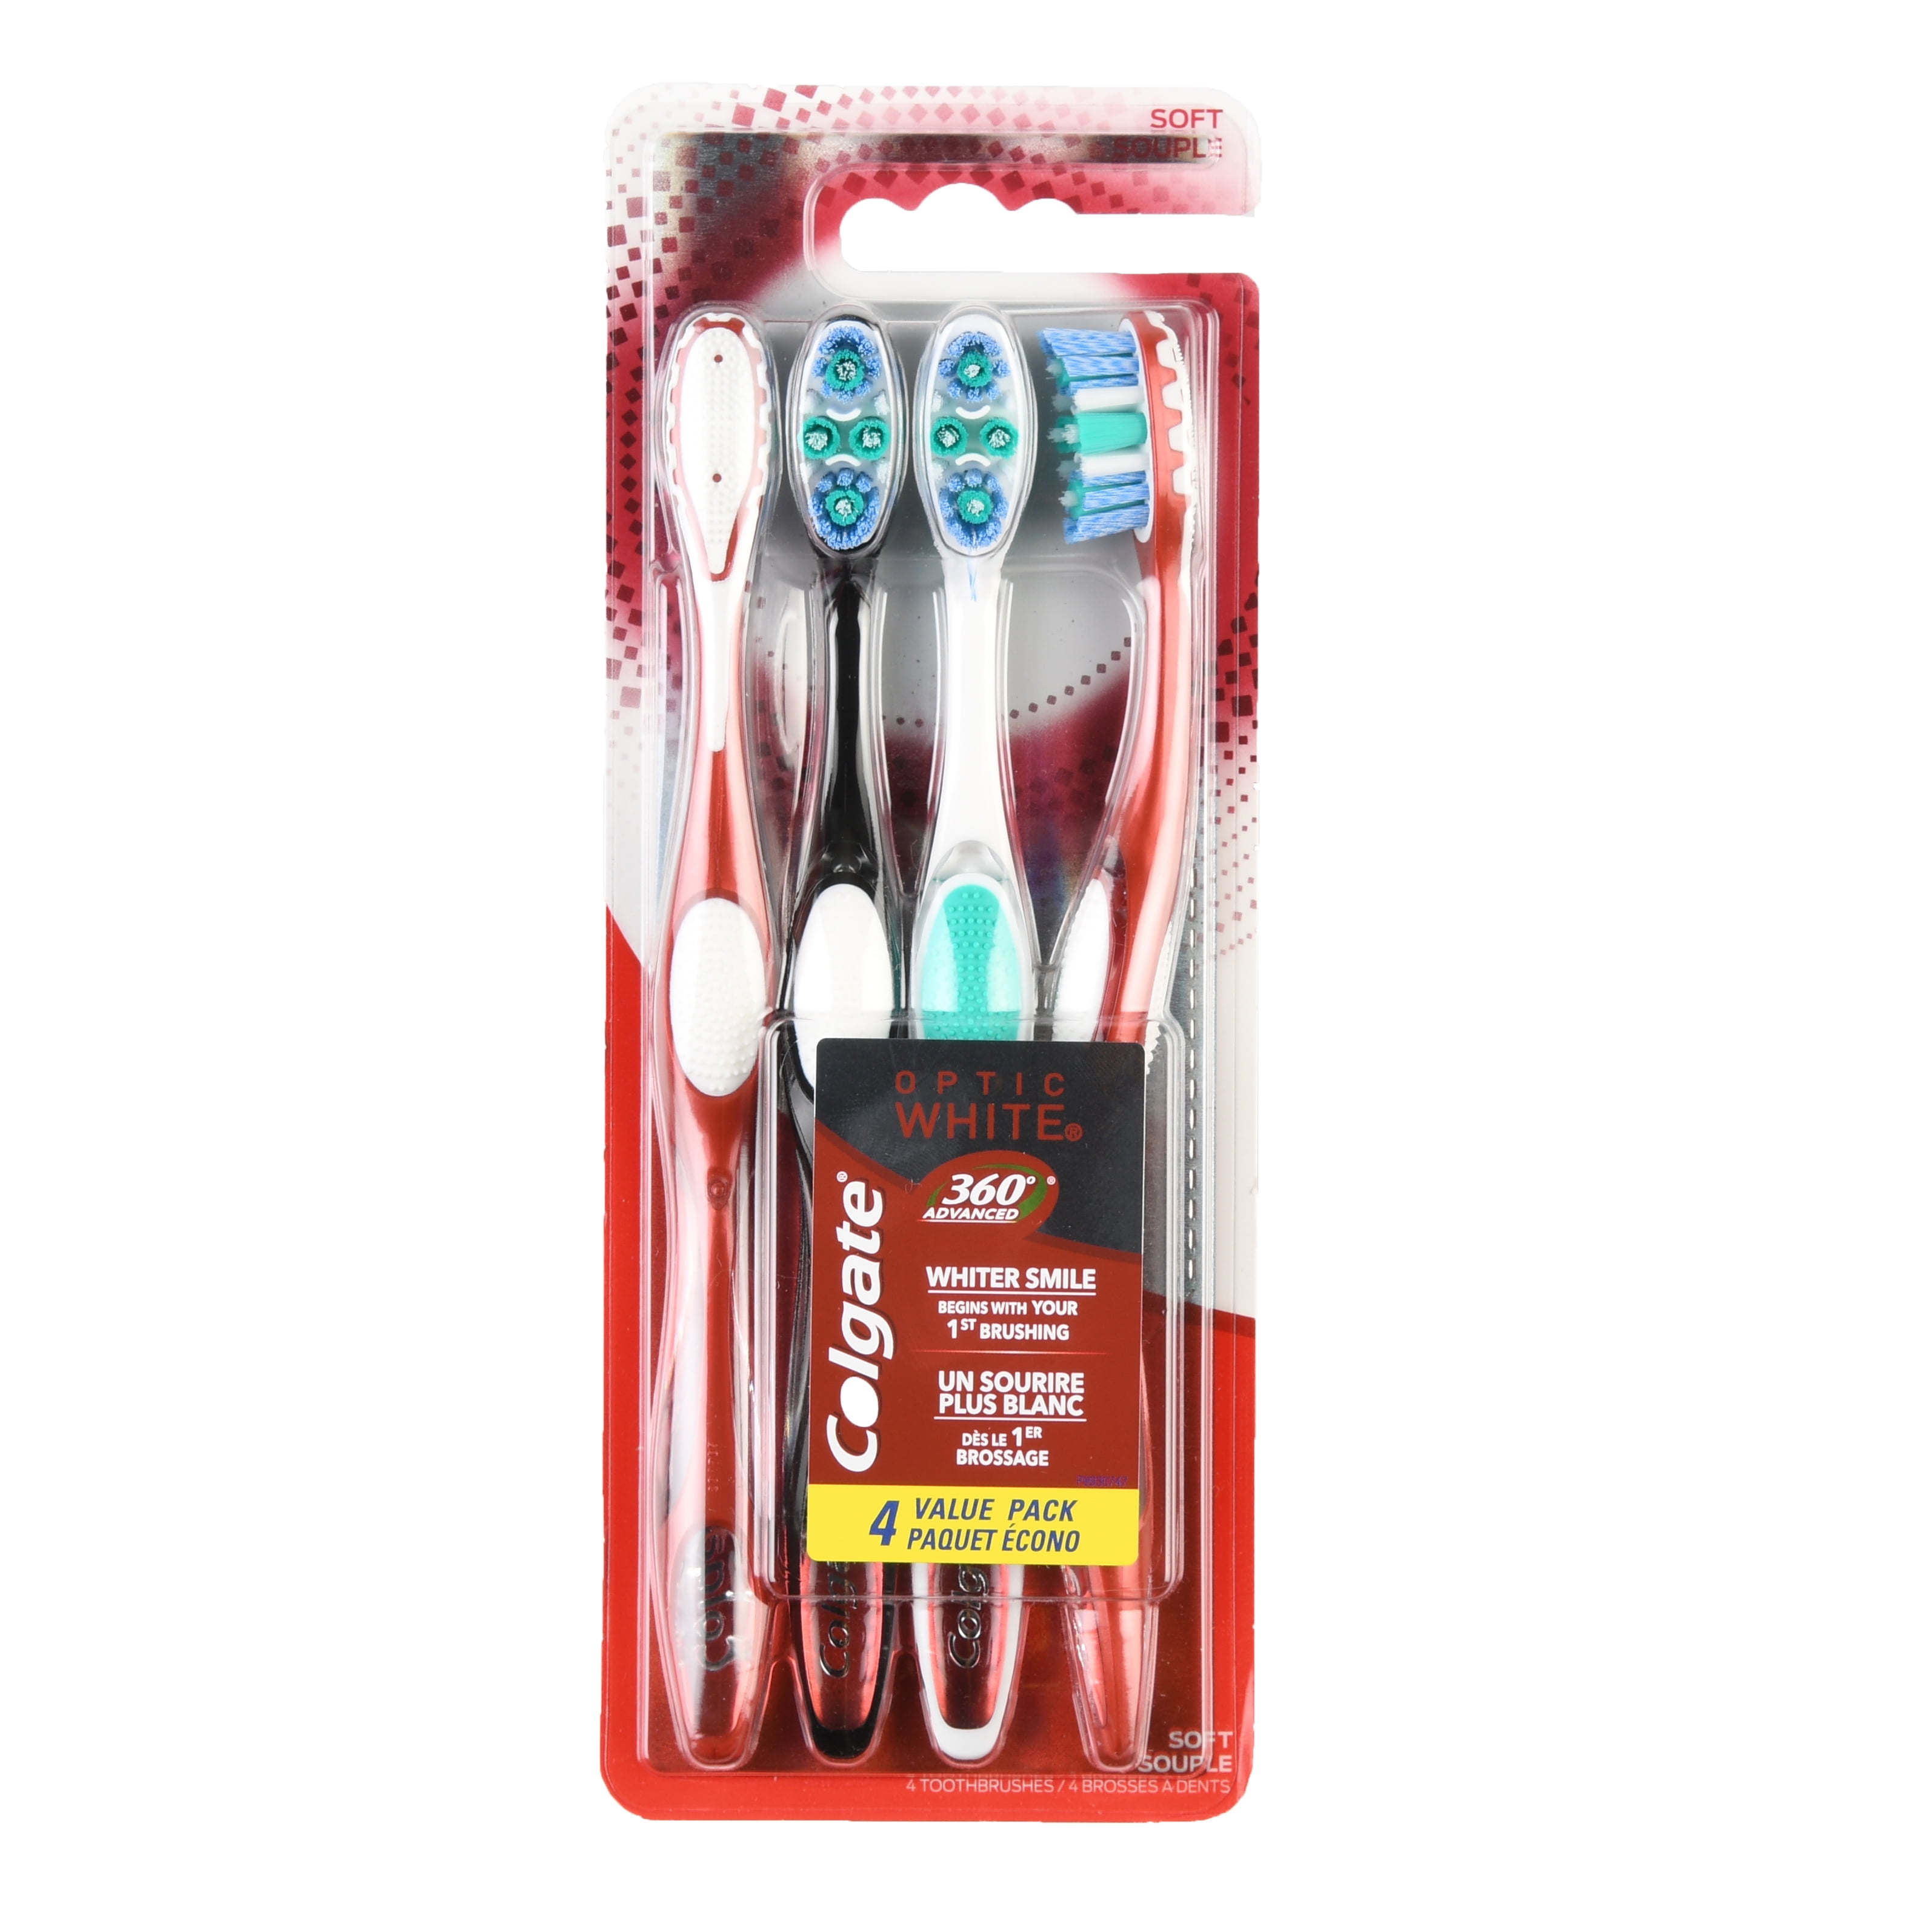 Colgate 360 Advanced Optic White Whitening Manual Toothbrush with Tongue and Cheek Cleaner, Soft, 4 Ct.